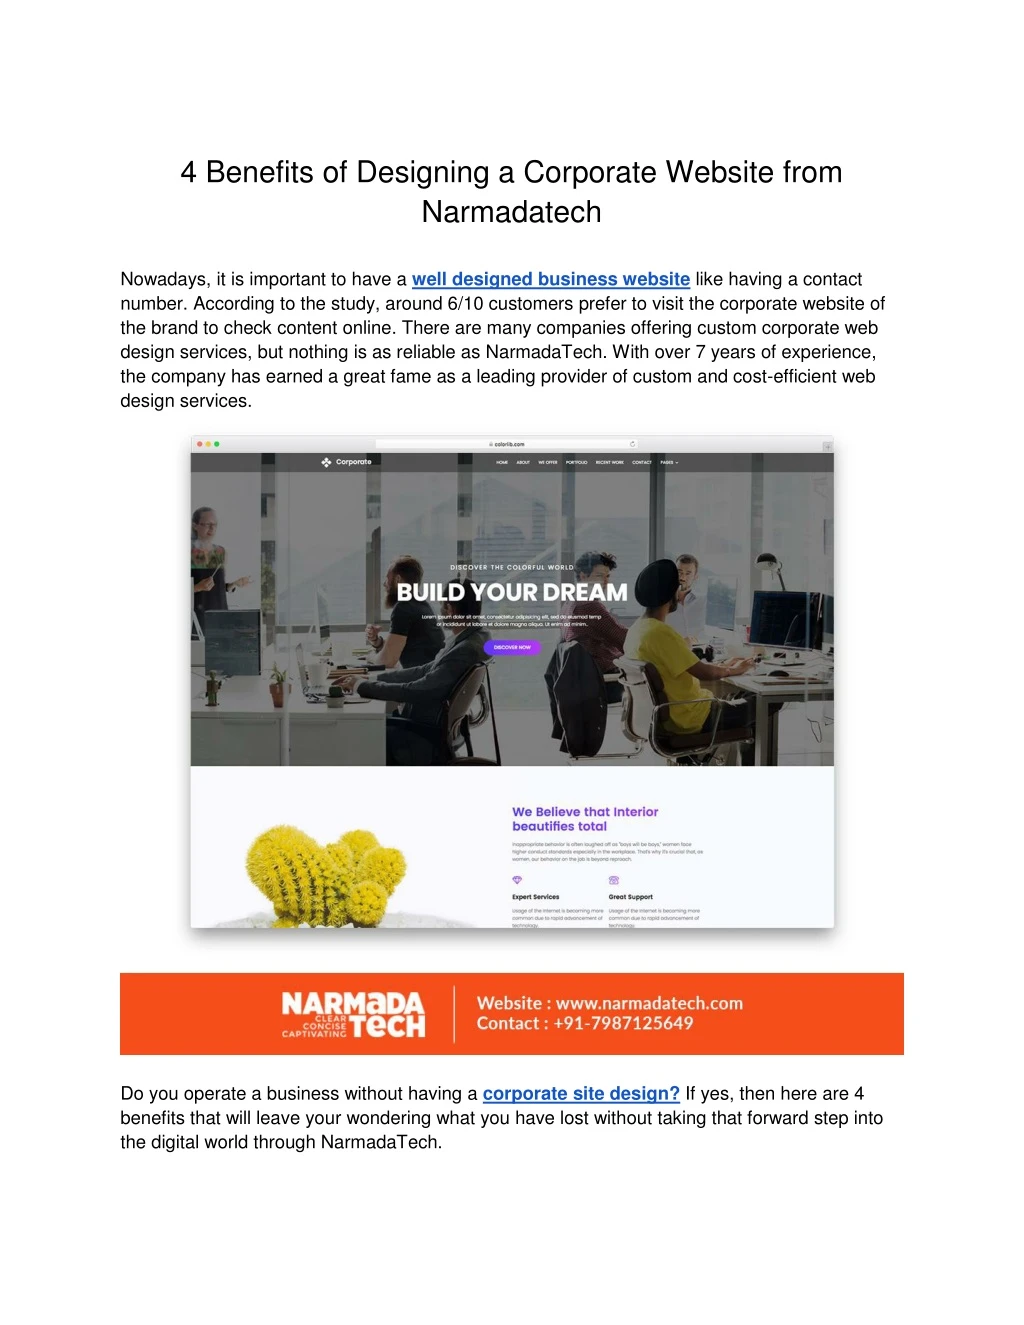 4 benefits of designing a corporate website from